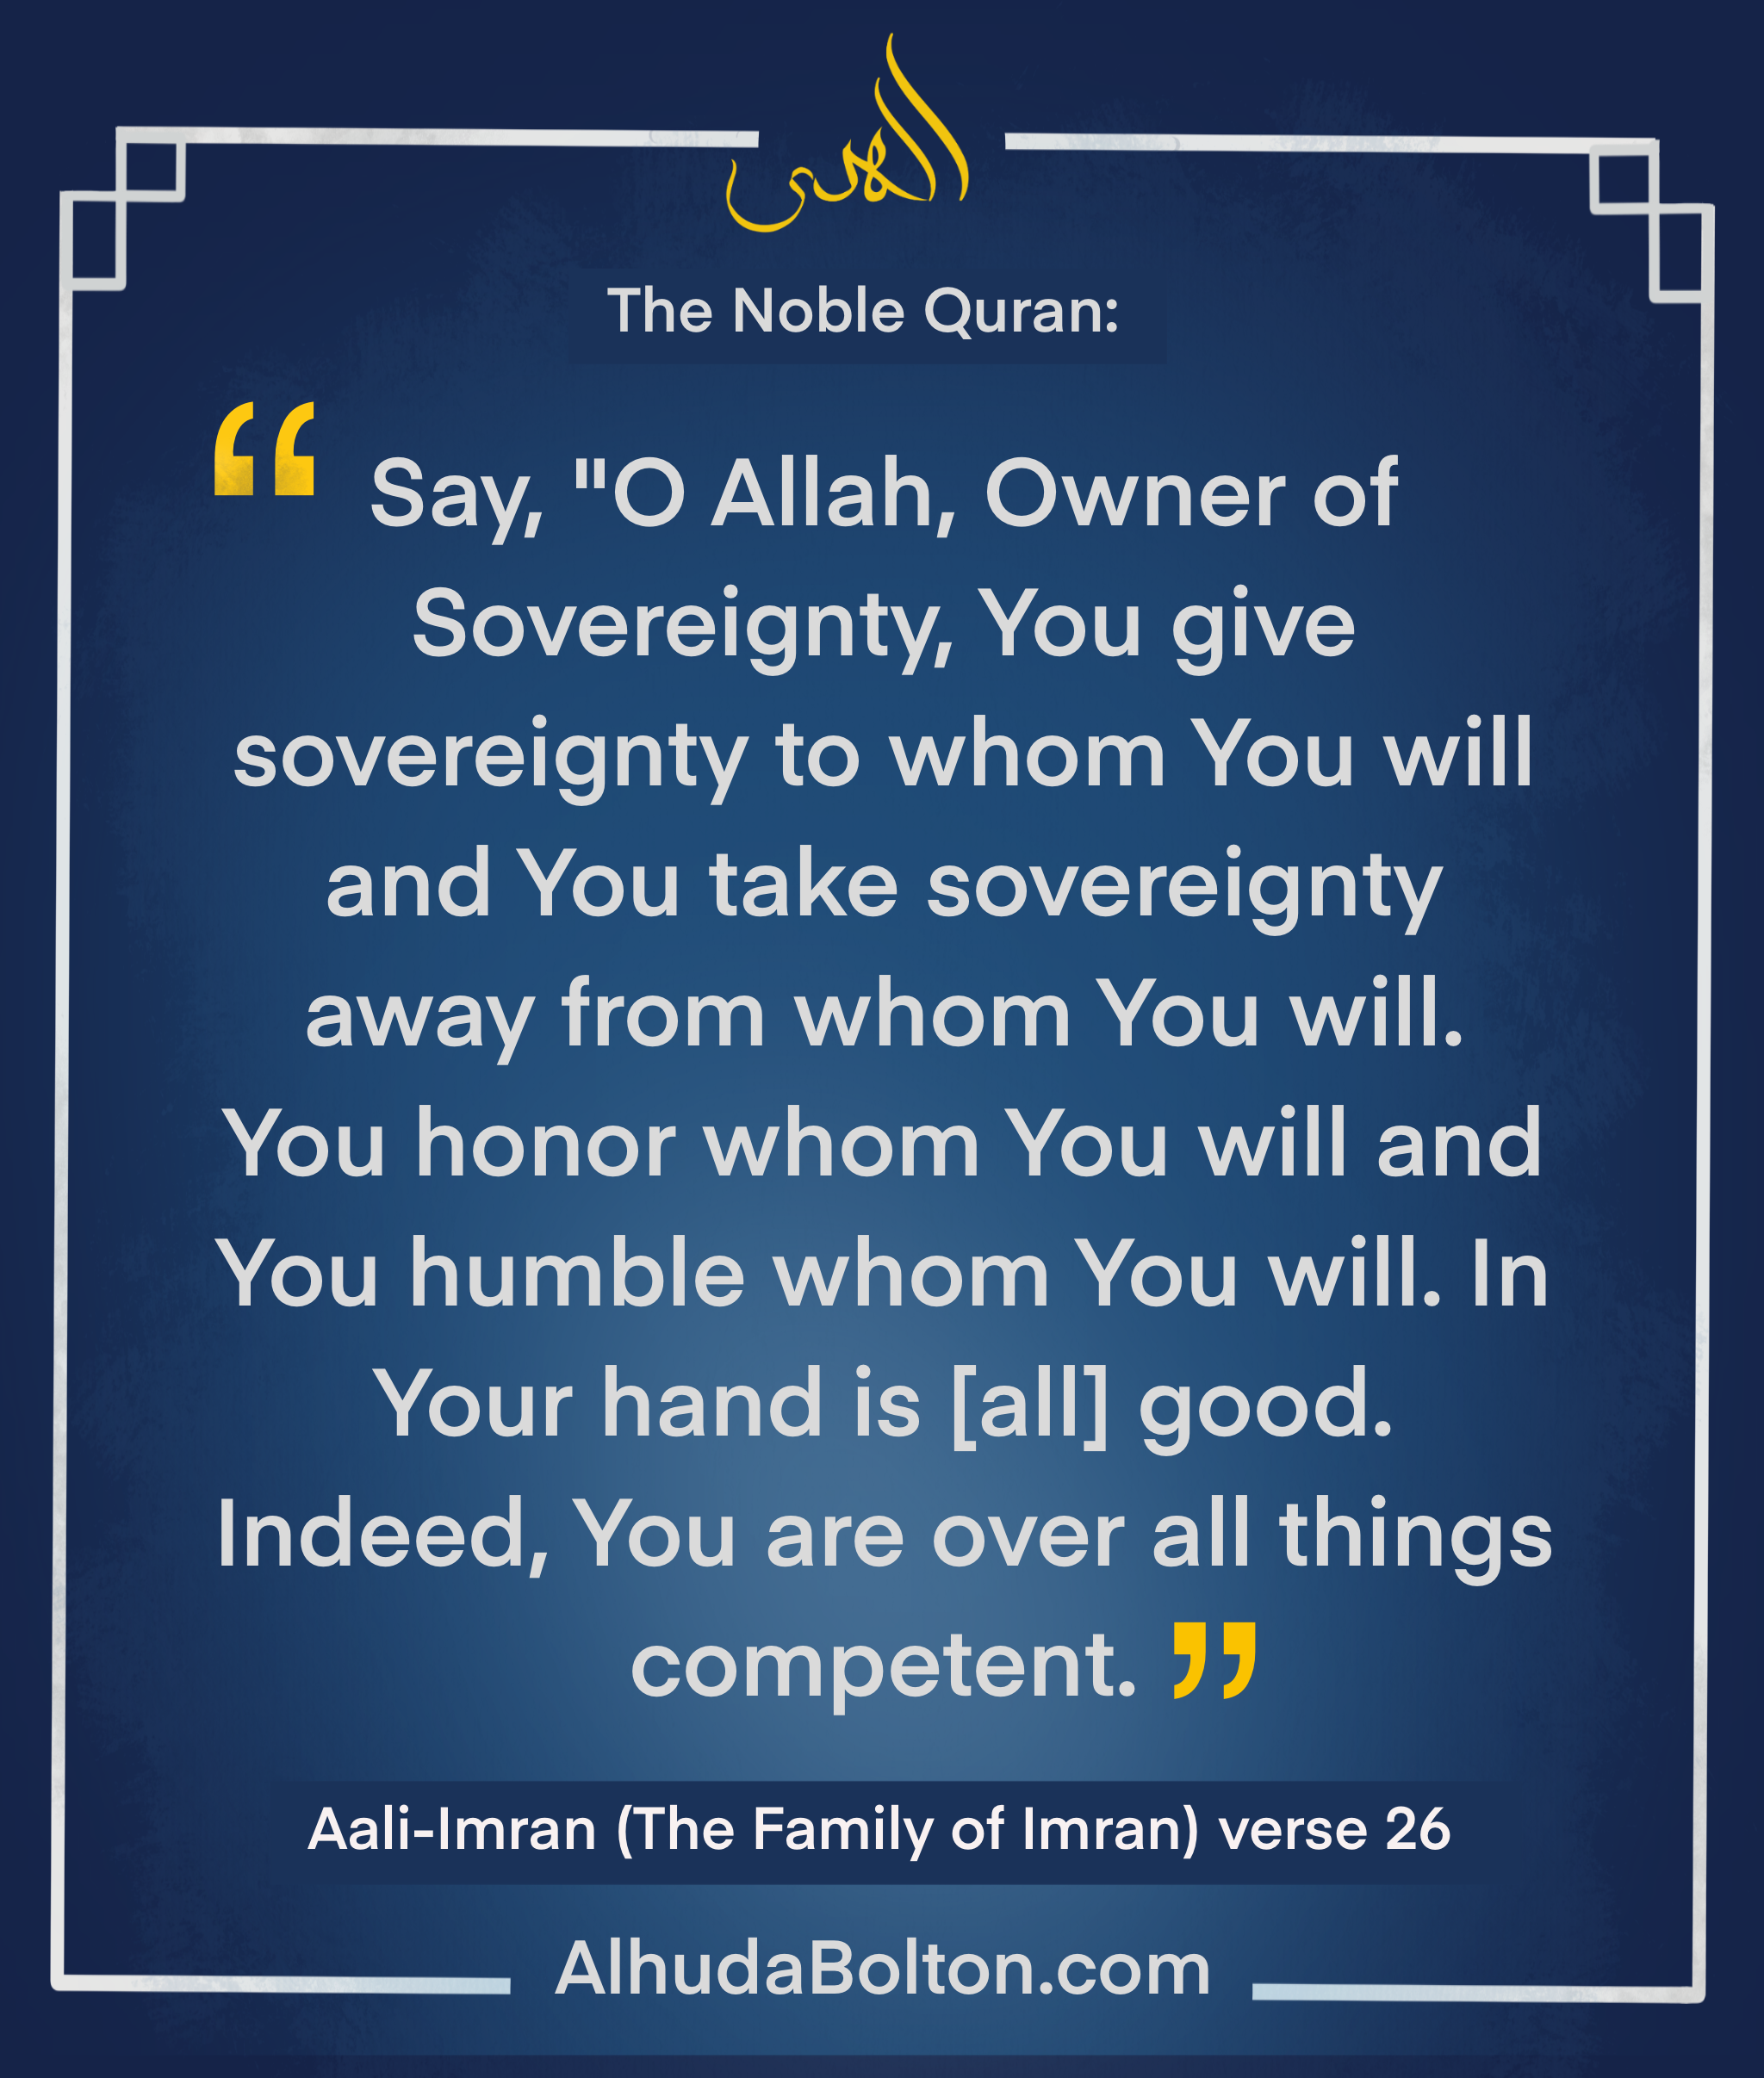 Quran: “Owner of Sovereignty”